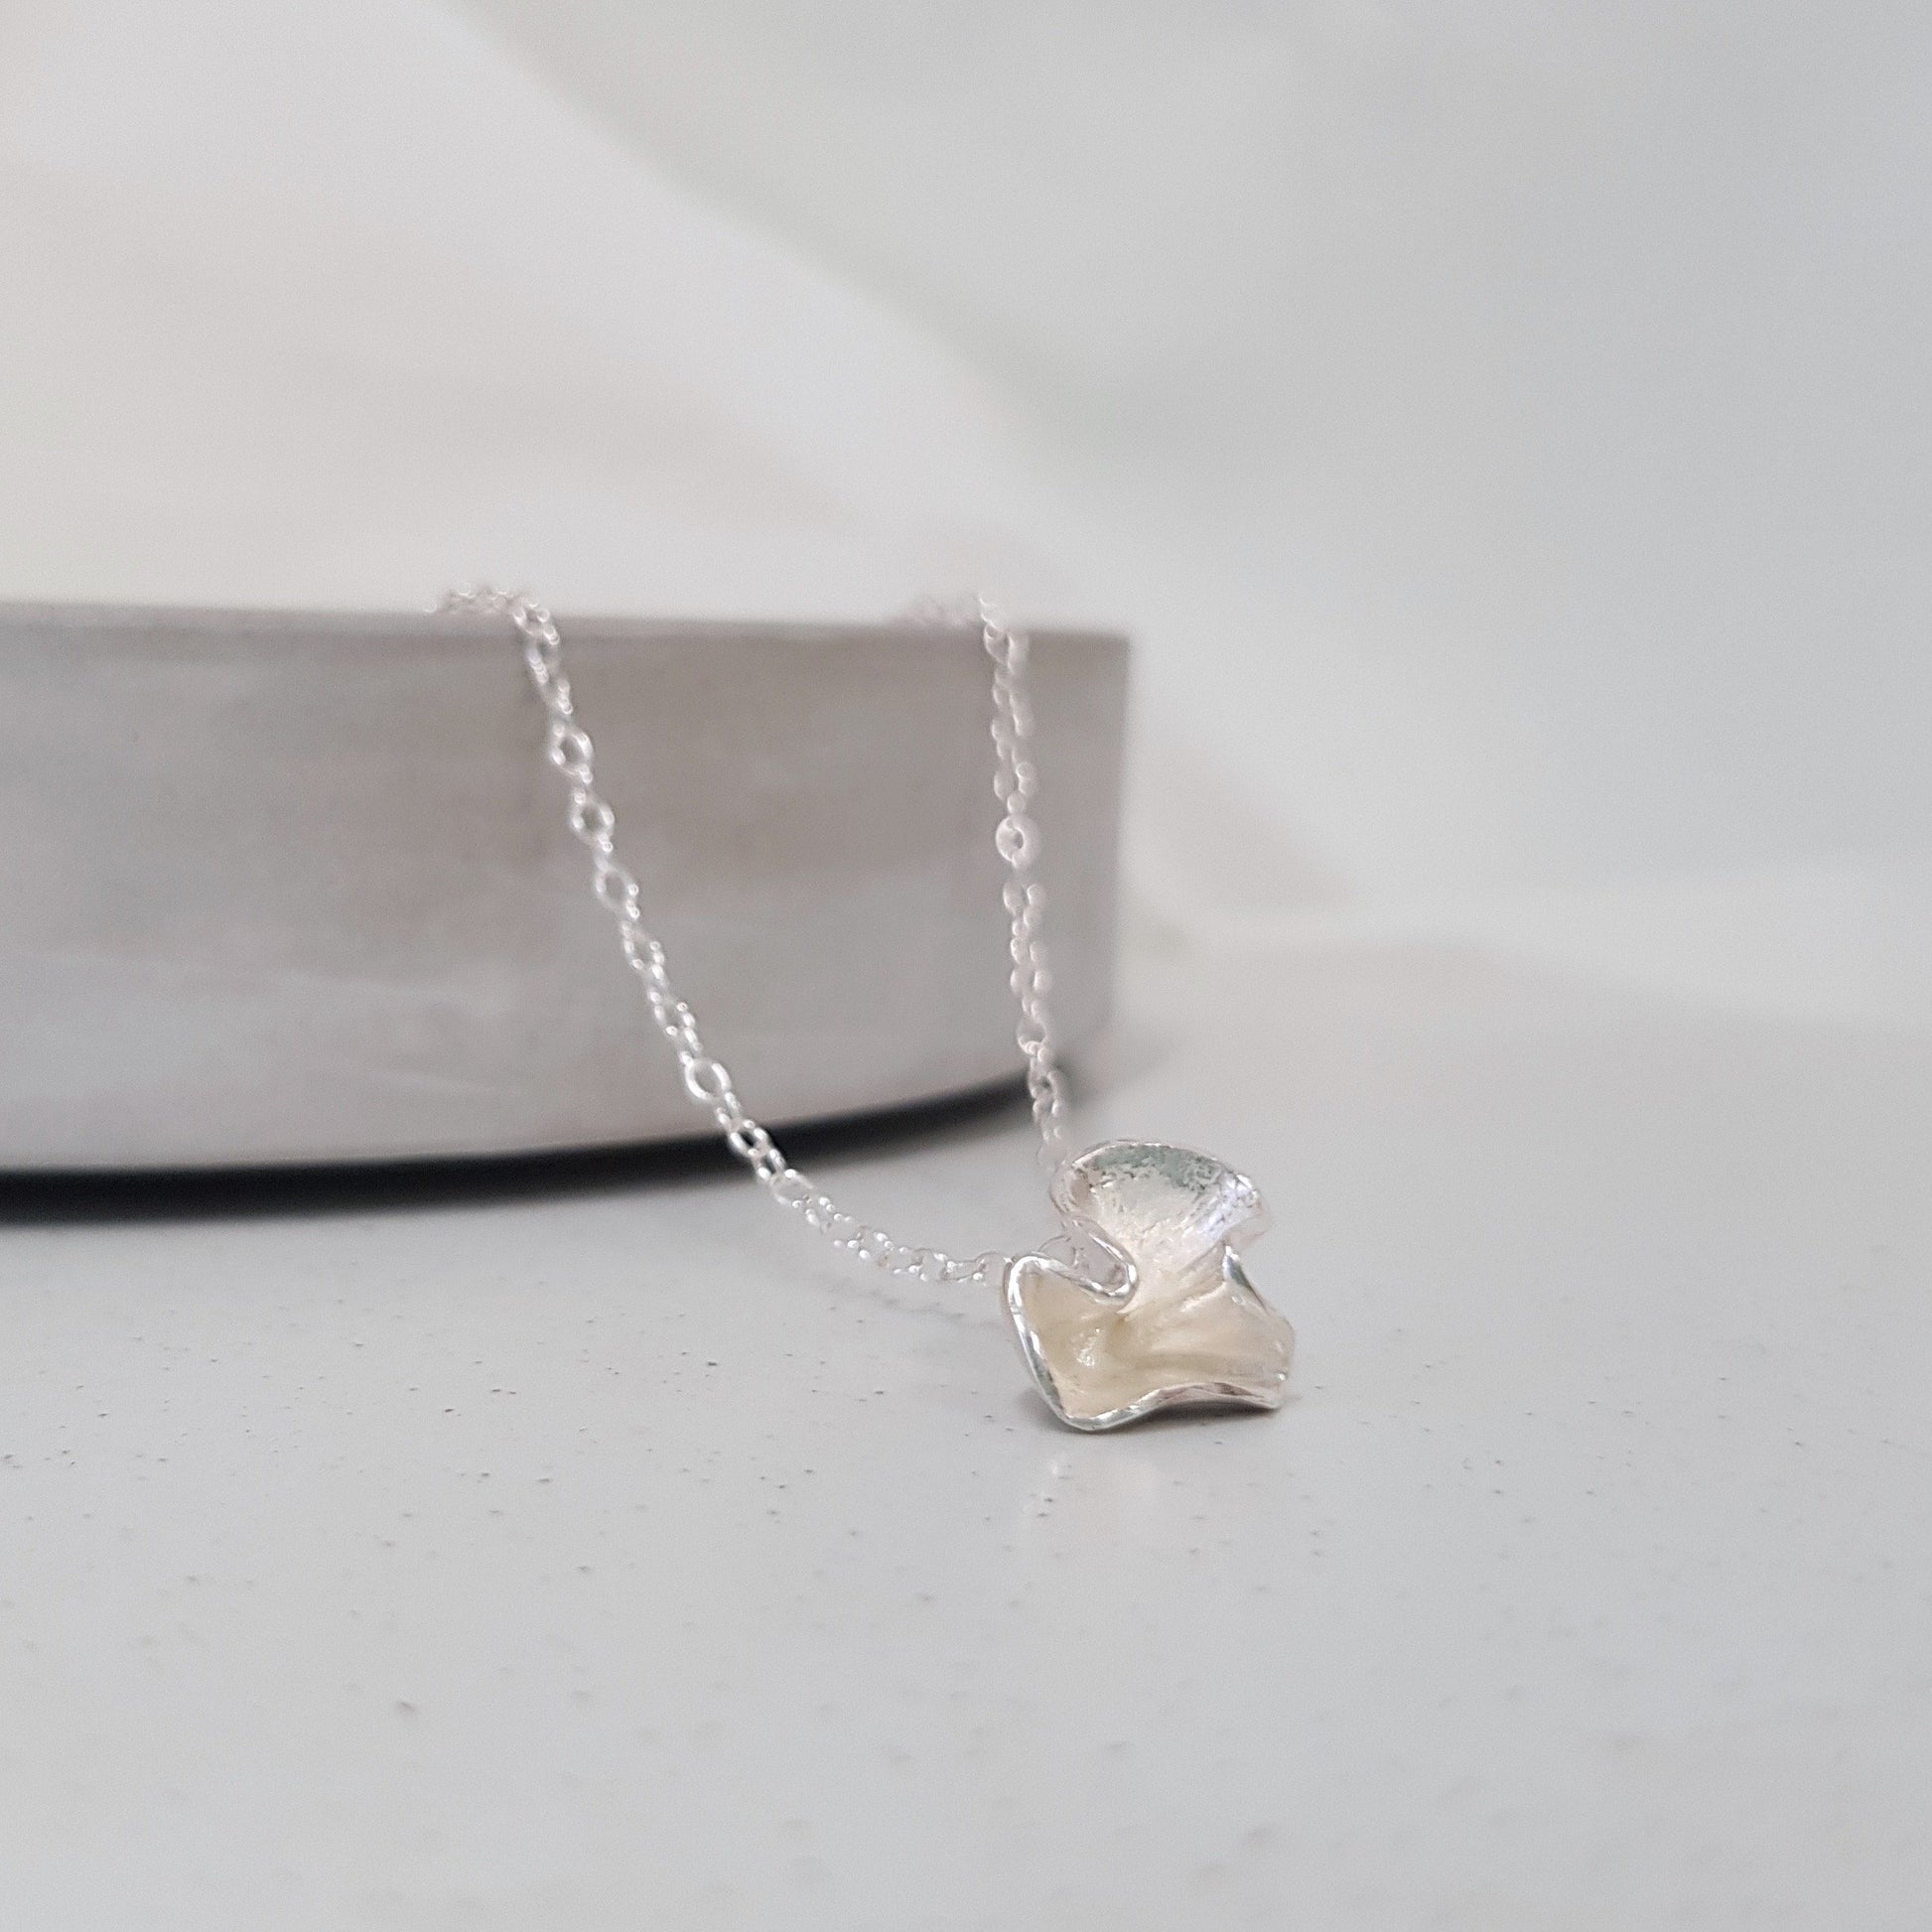 Silver Blossom Necklace - Small, Necklace - Anna Calvert Jewellery Handmade in the  UK